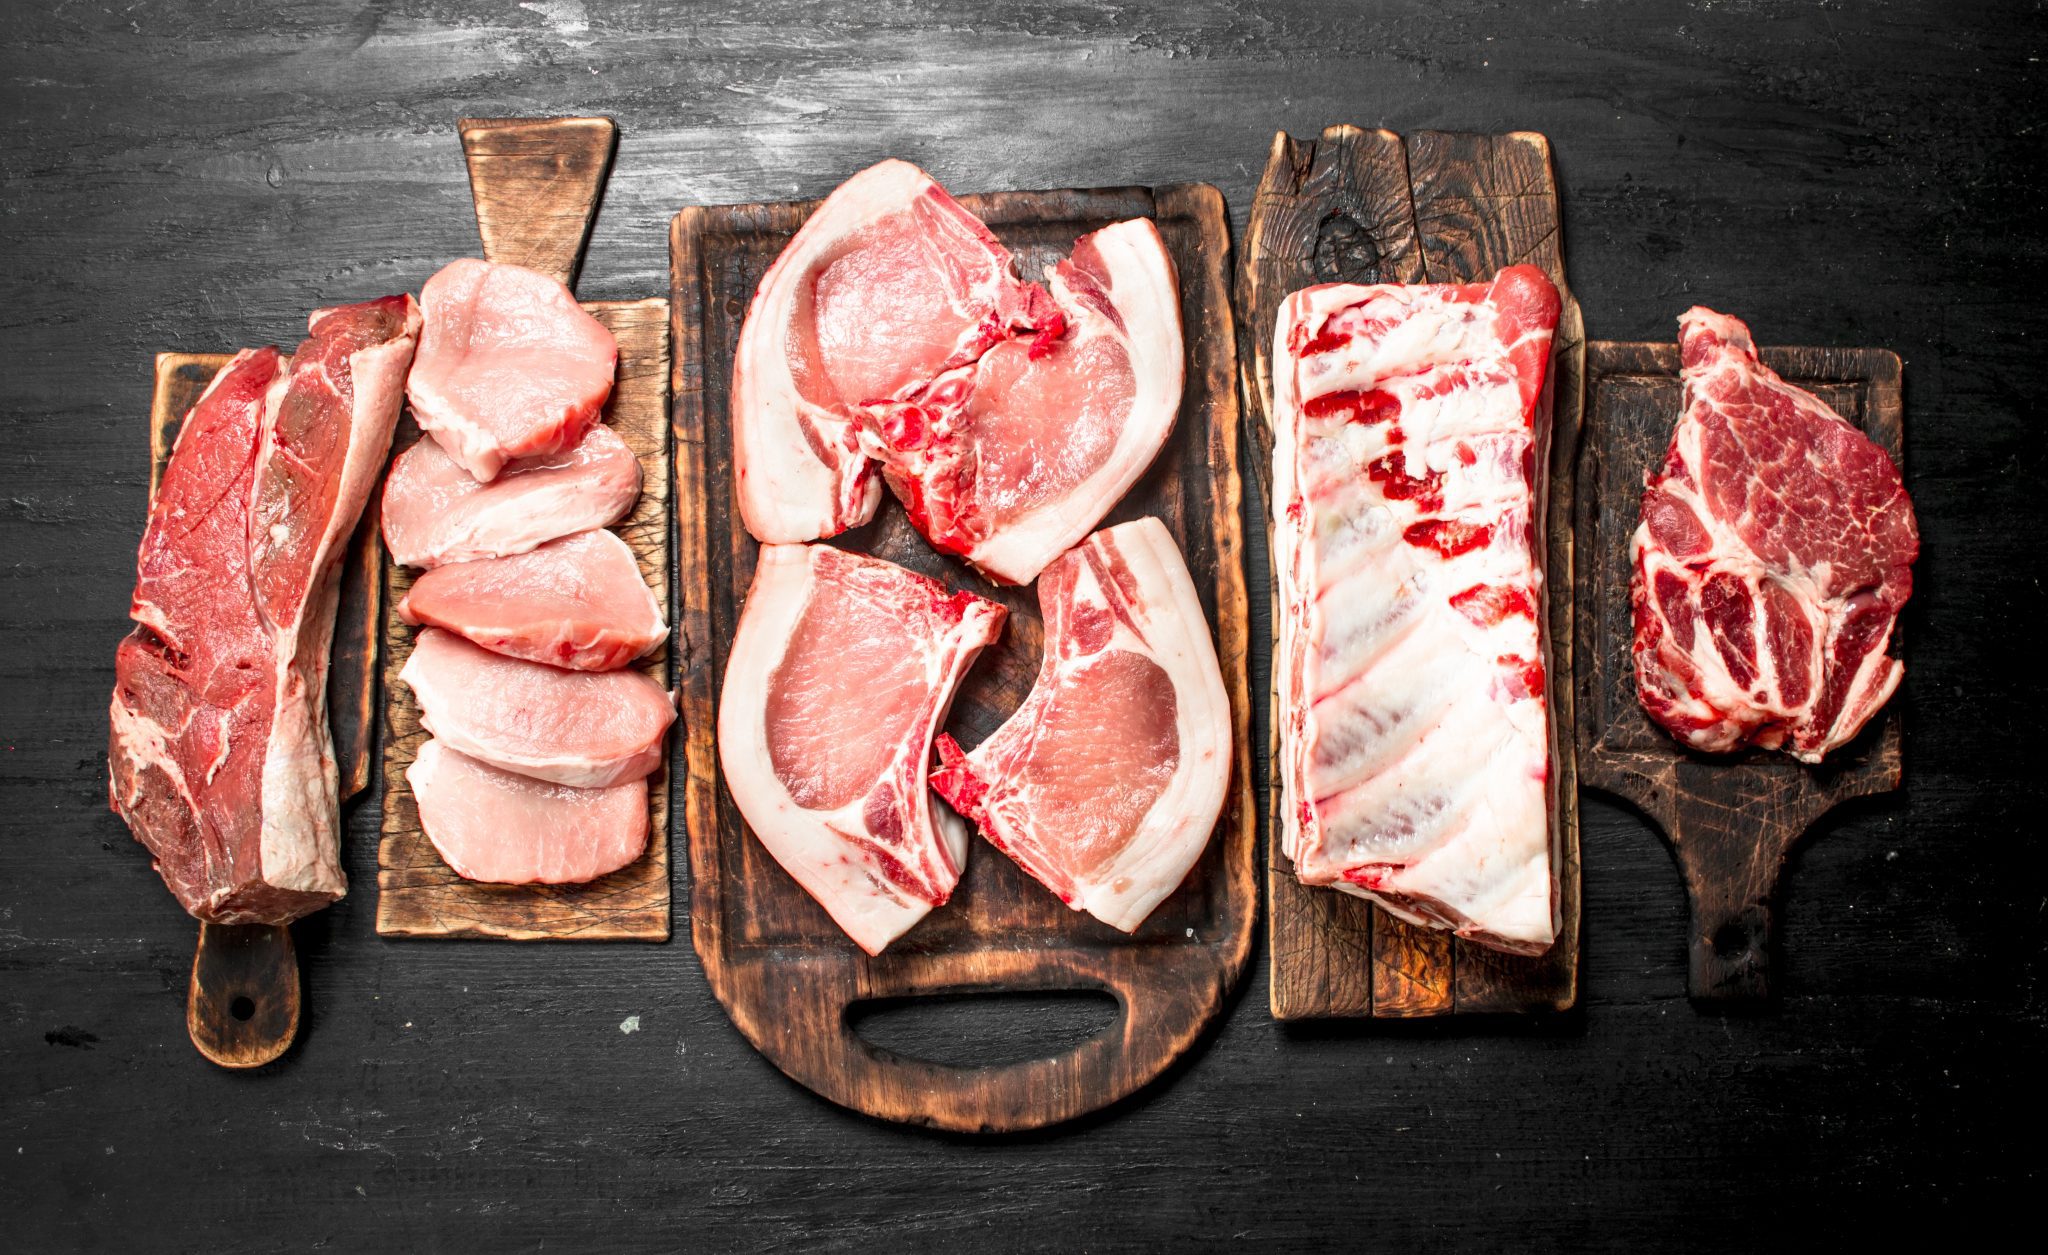 A Guide to Meat: The 8 Cuts of Pork